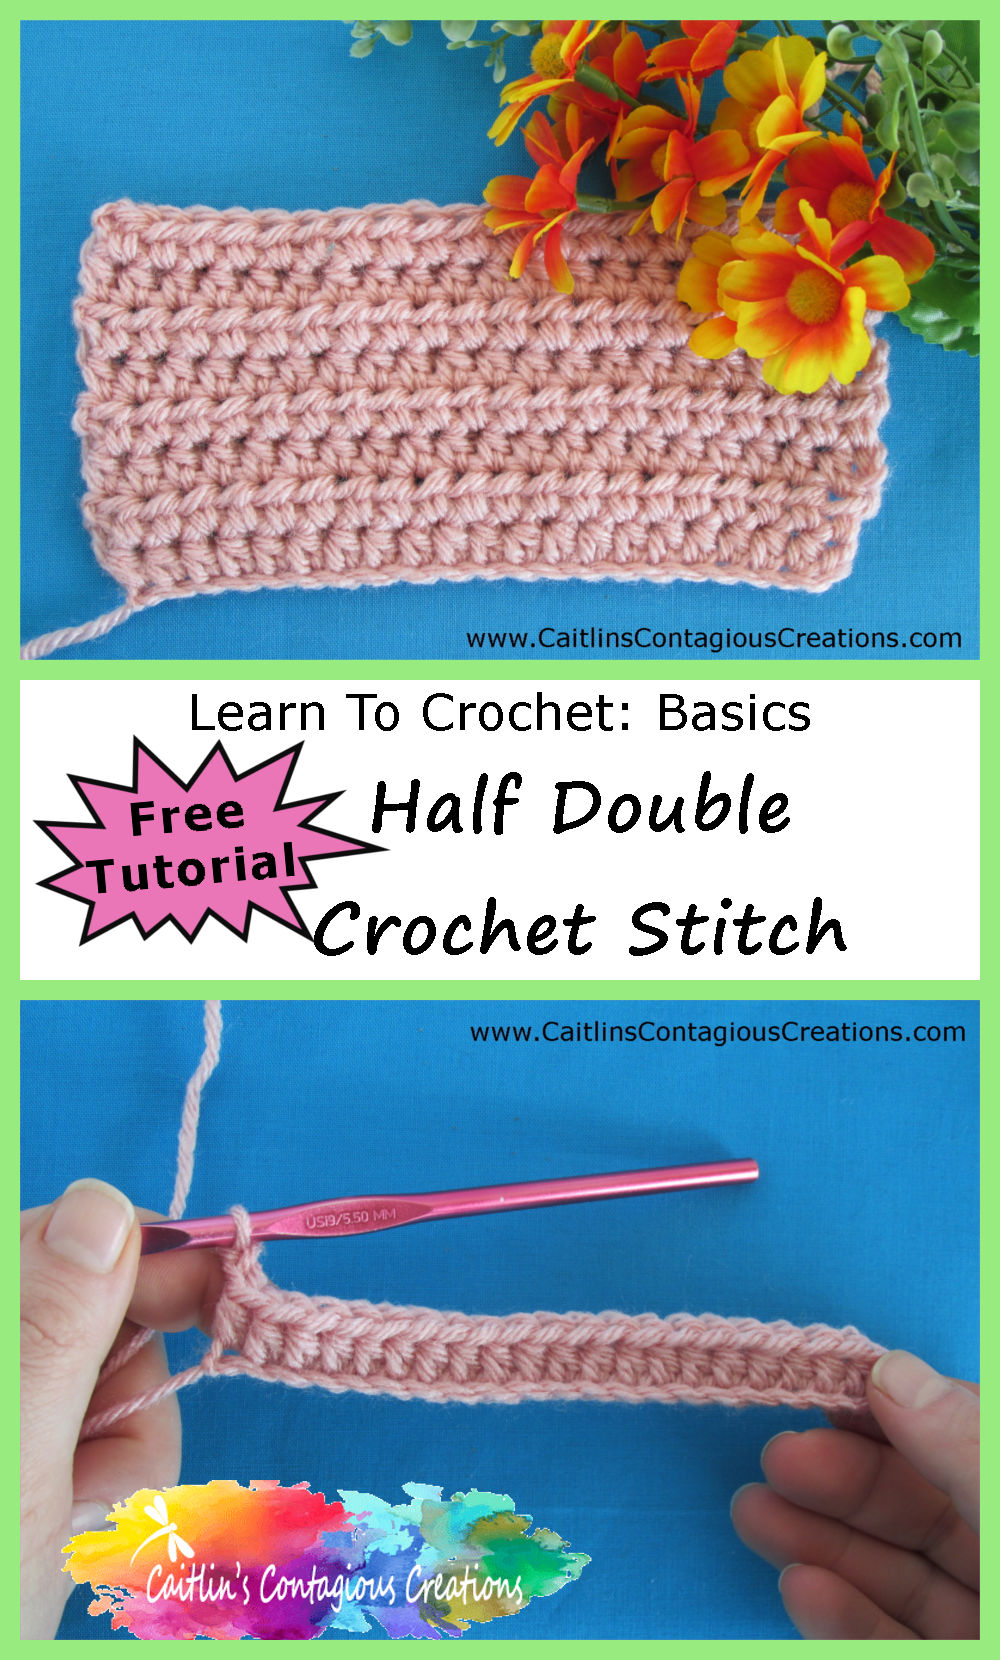 Free Half Double Crochet Stitch Guide from Caitlin's Contagious Creations. An easy to follow, step by step stitch tutorial with written directions and photo instruction to teach any beginner the HDC, a basic crochet skill.